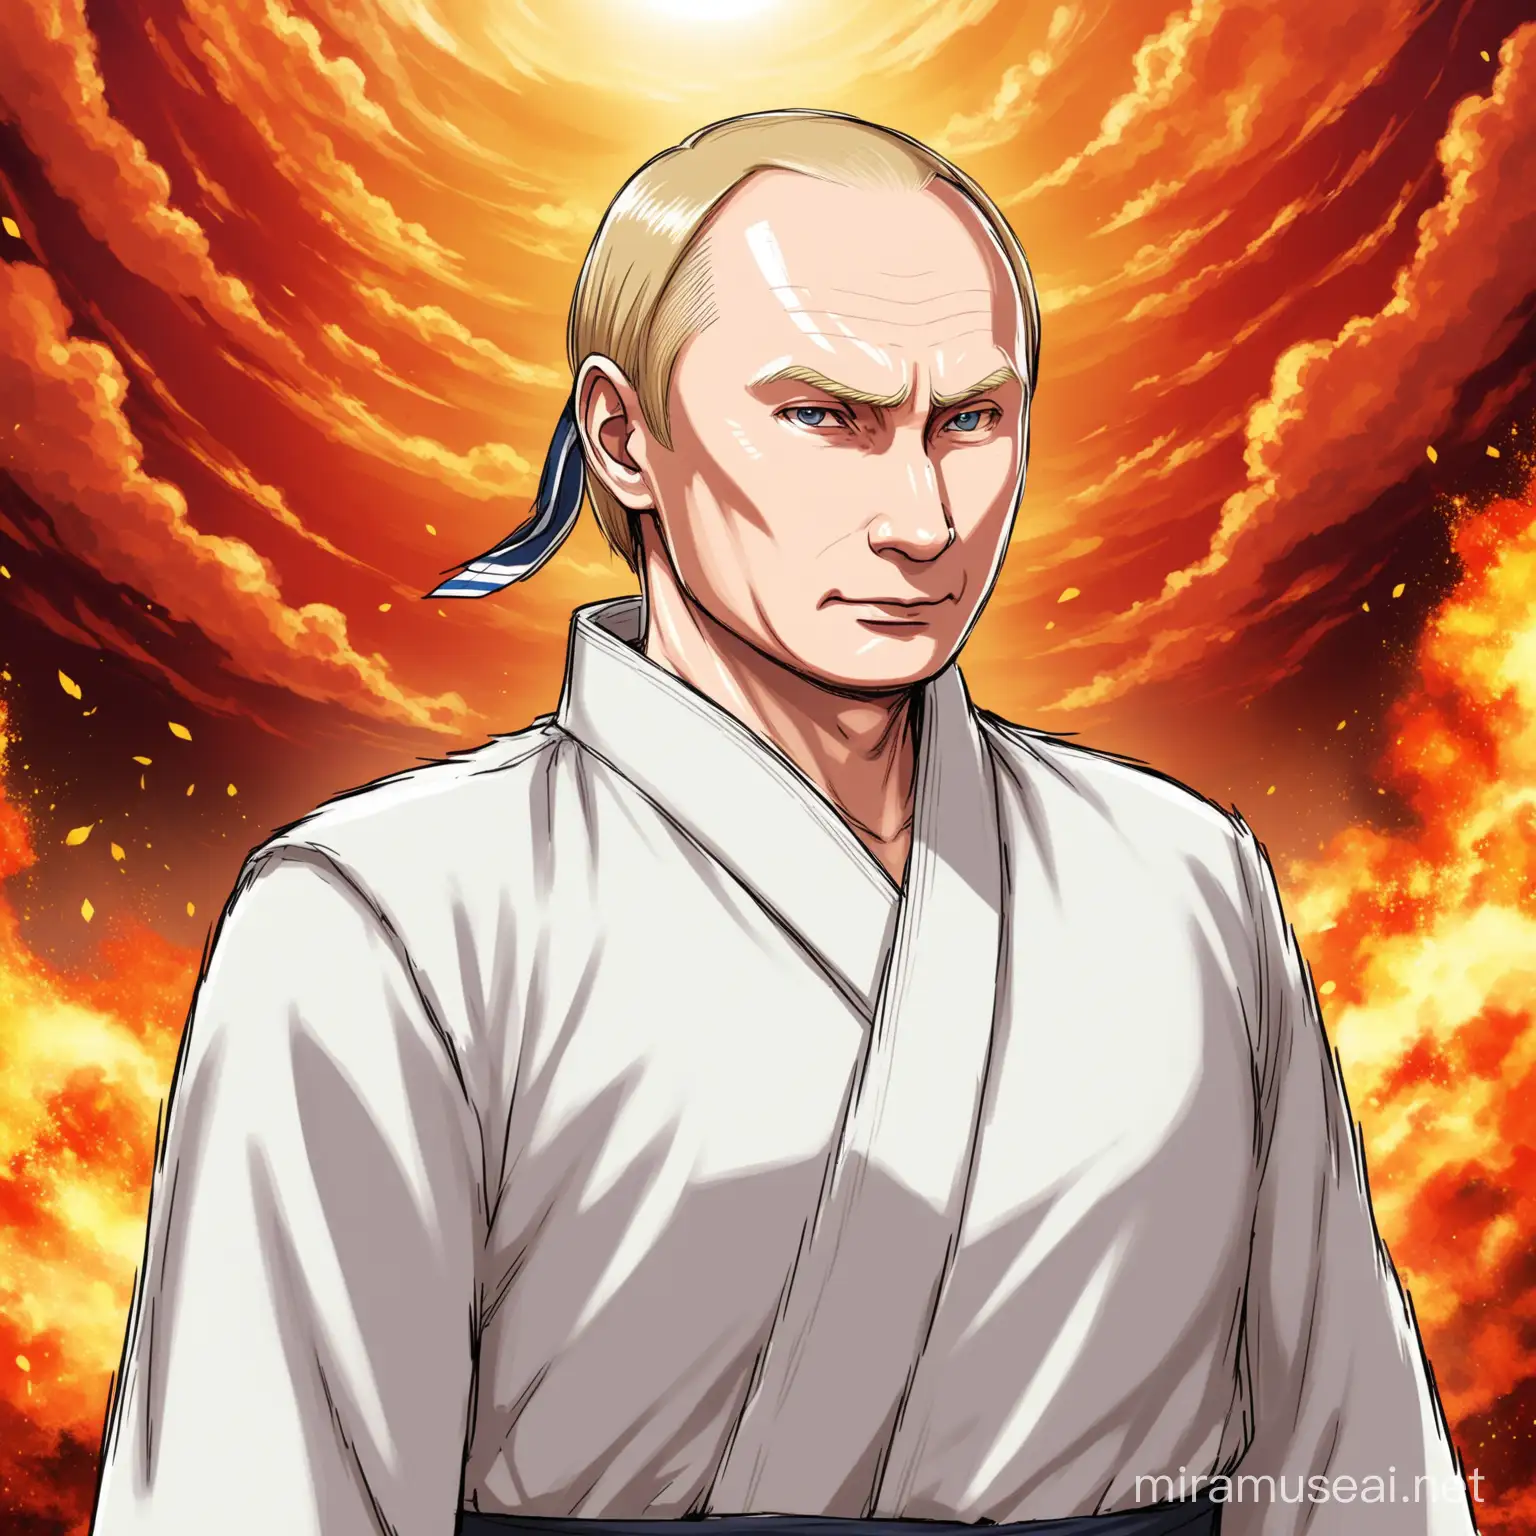 President Putin Transformed into a Dynamic Naruto Character in an Epic Setting